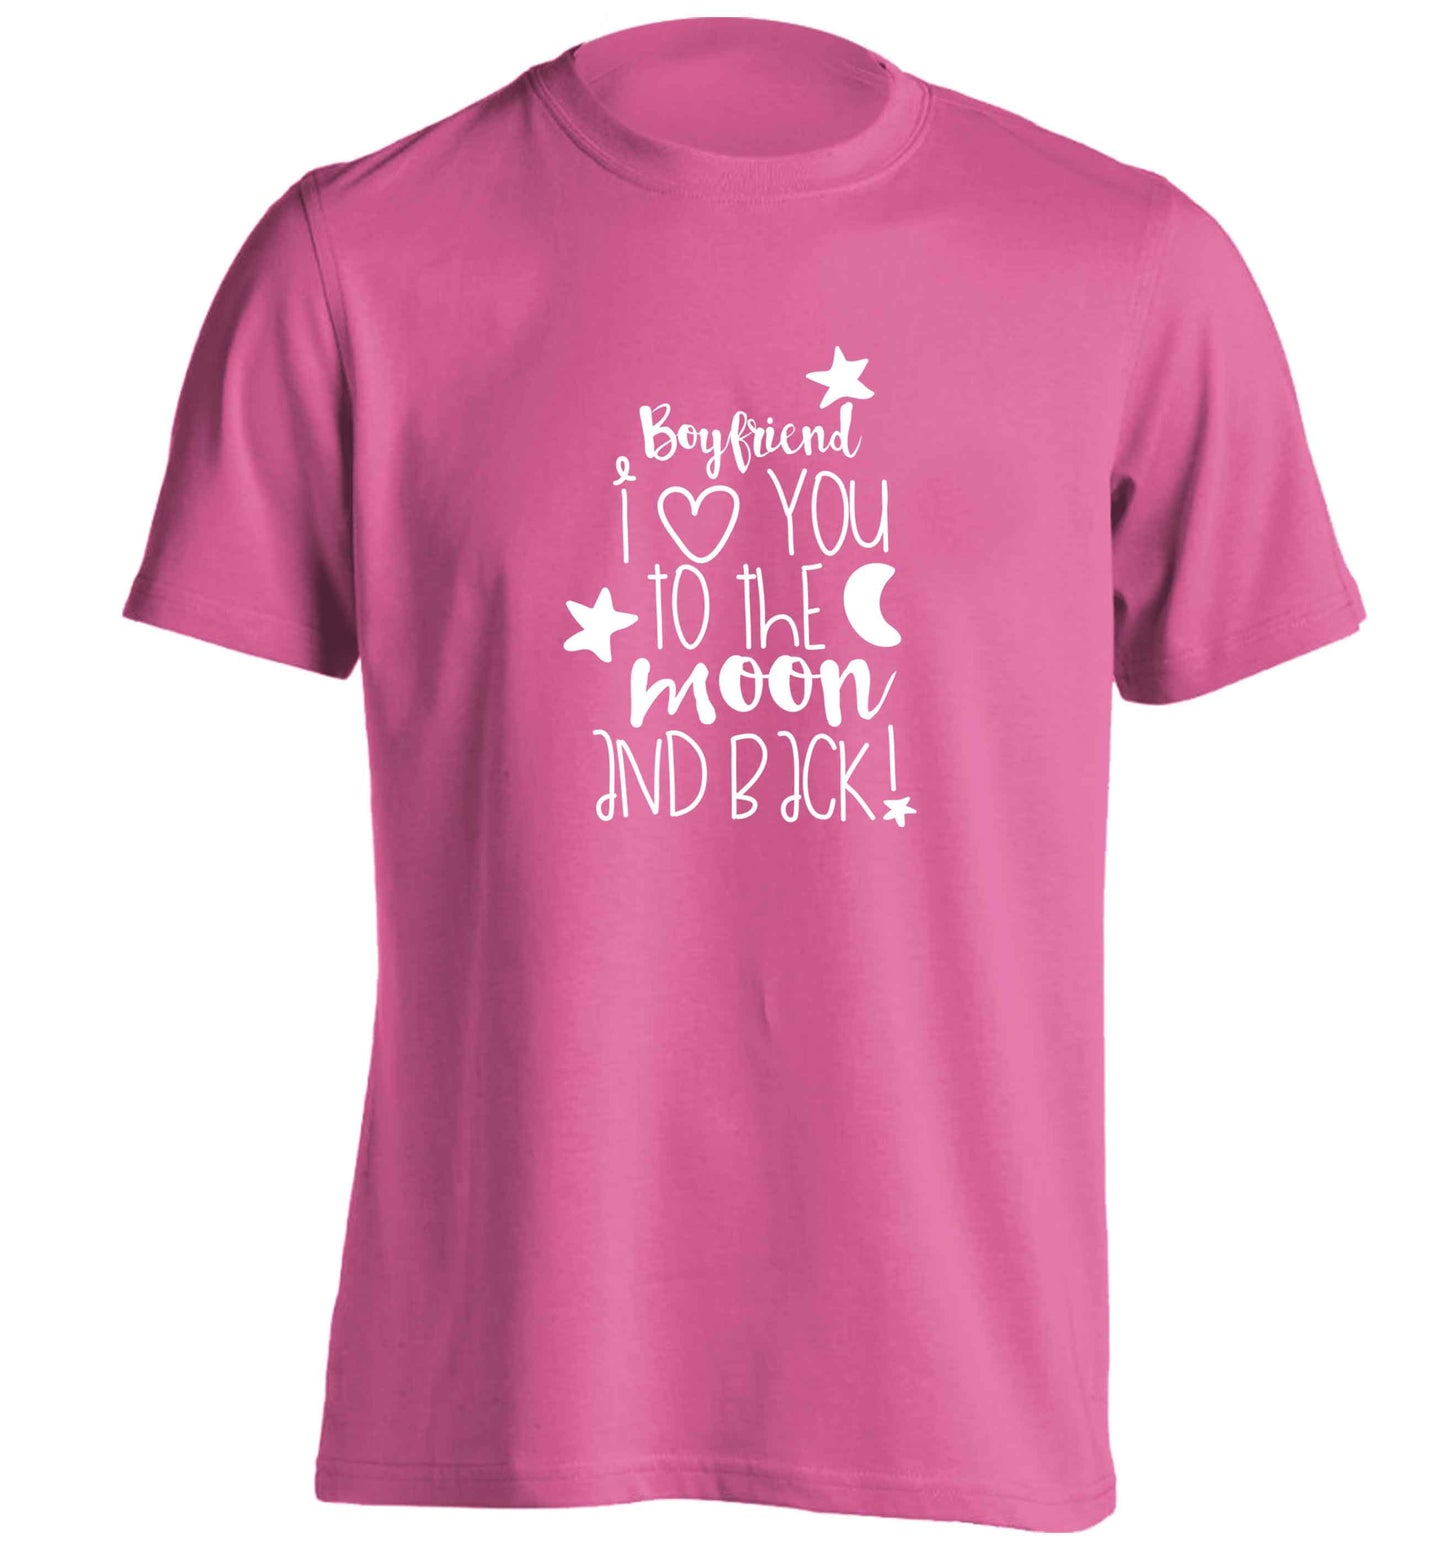 Boyfriend I love you to the moon and back adults unisex pink Tshirt 2XL